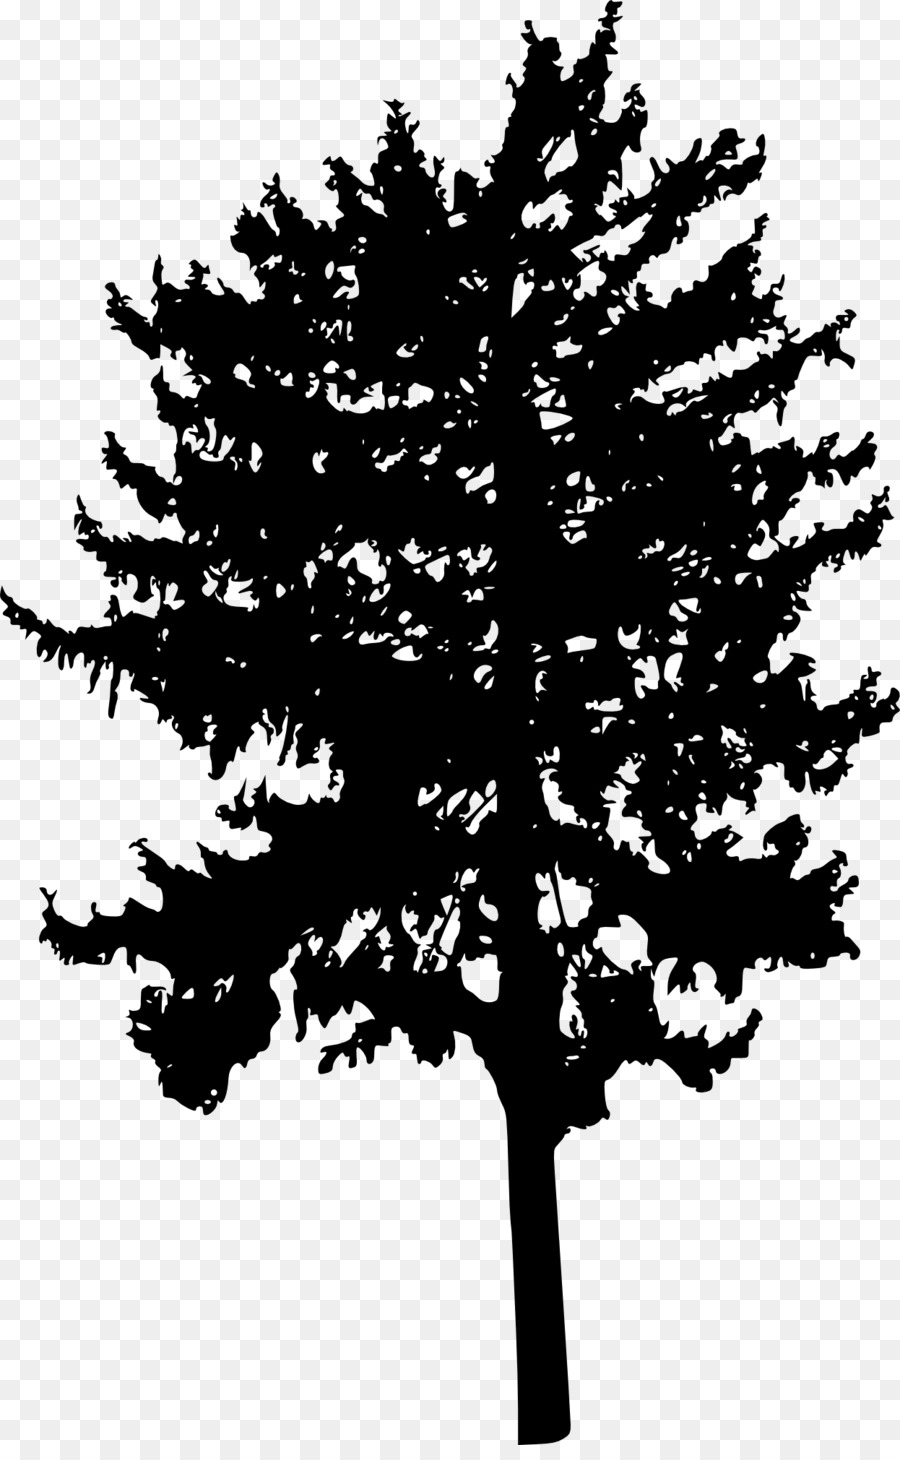 Tree Woody plant Branch Conifers - tree silhouette png download - 1246*2000 - Free Transparent Tree png Download.